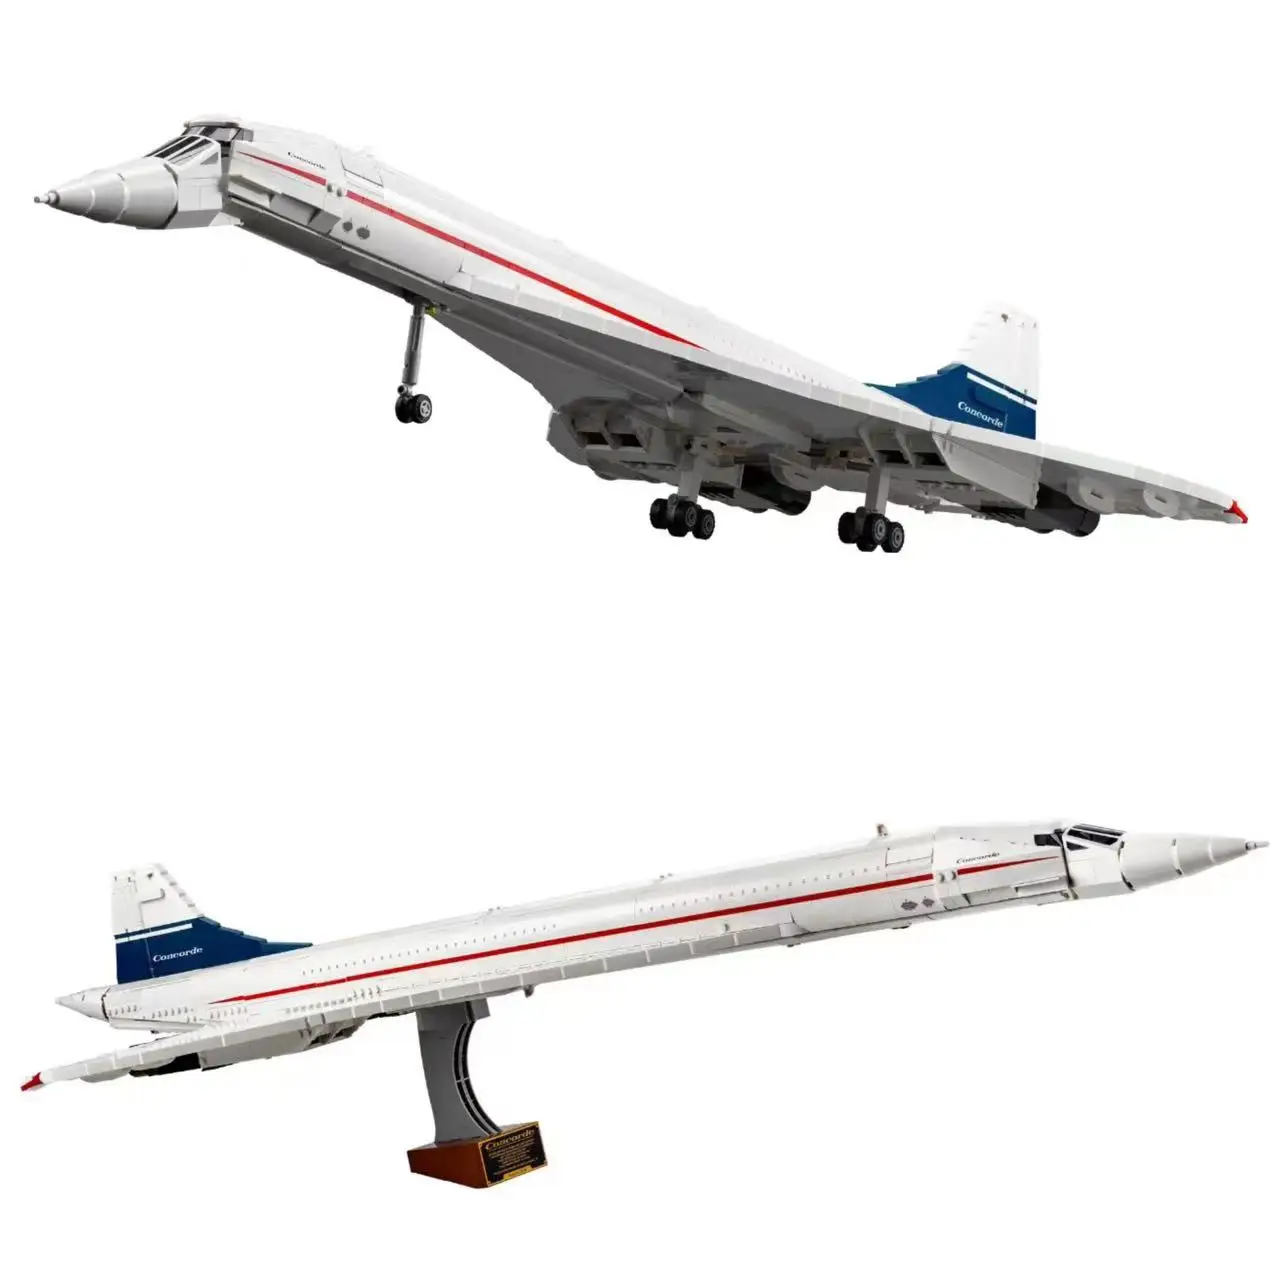 

NEW 10318 Airbus Concorde Building Kit World’s first supersonic Airliner Aviation Space Shuttle Blocks Brick Educational Toy Kid